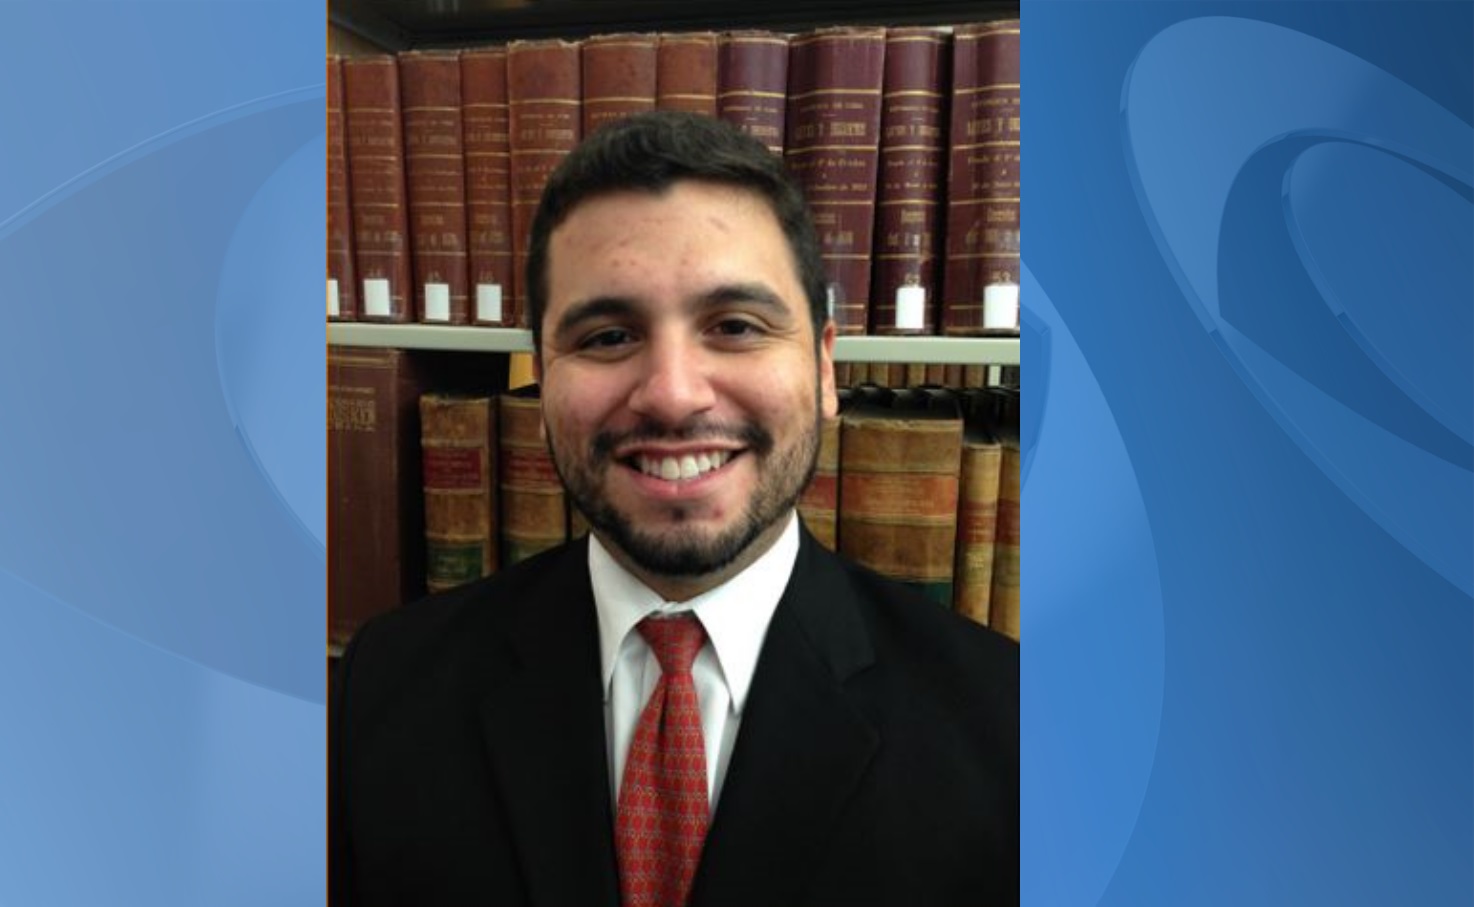 Miami Lawyer Whose Pants Caught Fire in Court Charged With Cocaine  Possession  NBC 6 South Florida